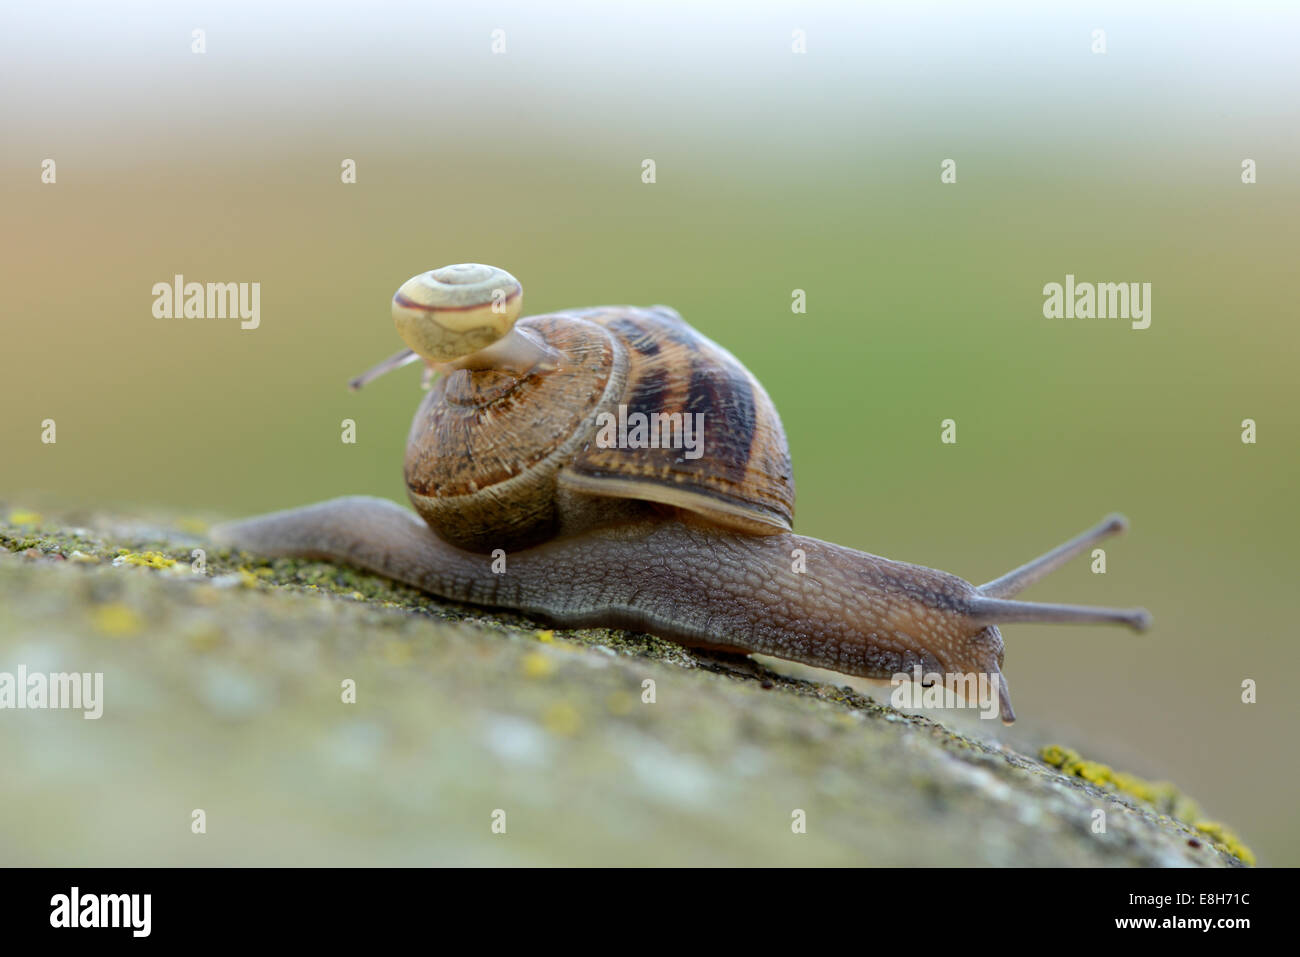 Snail, Gastropoda, carrying child on her shell Stock Photo